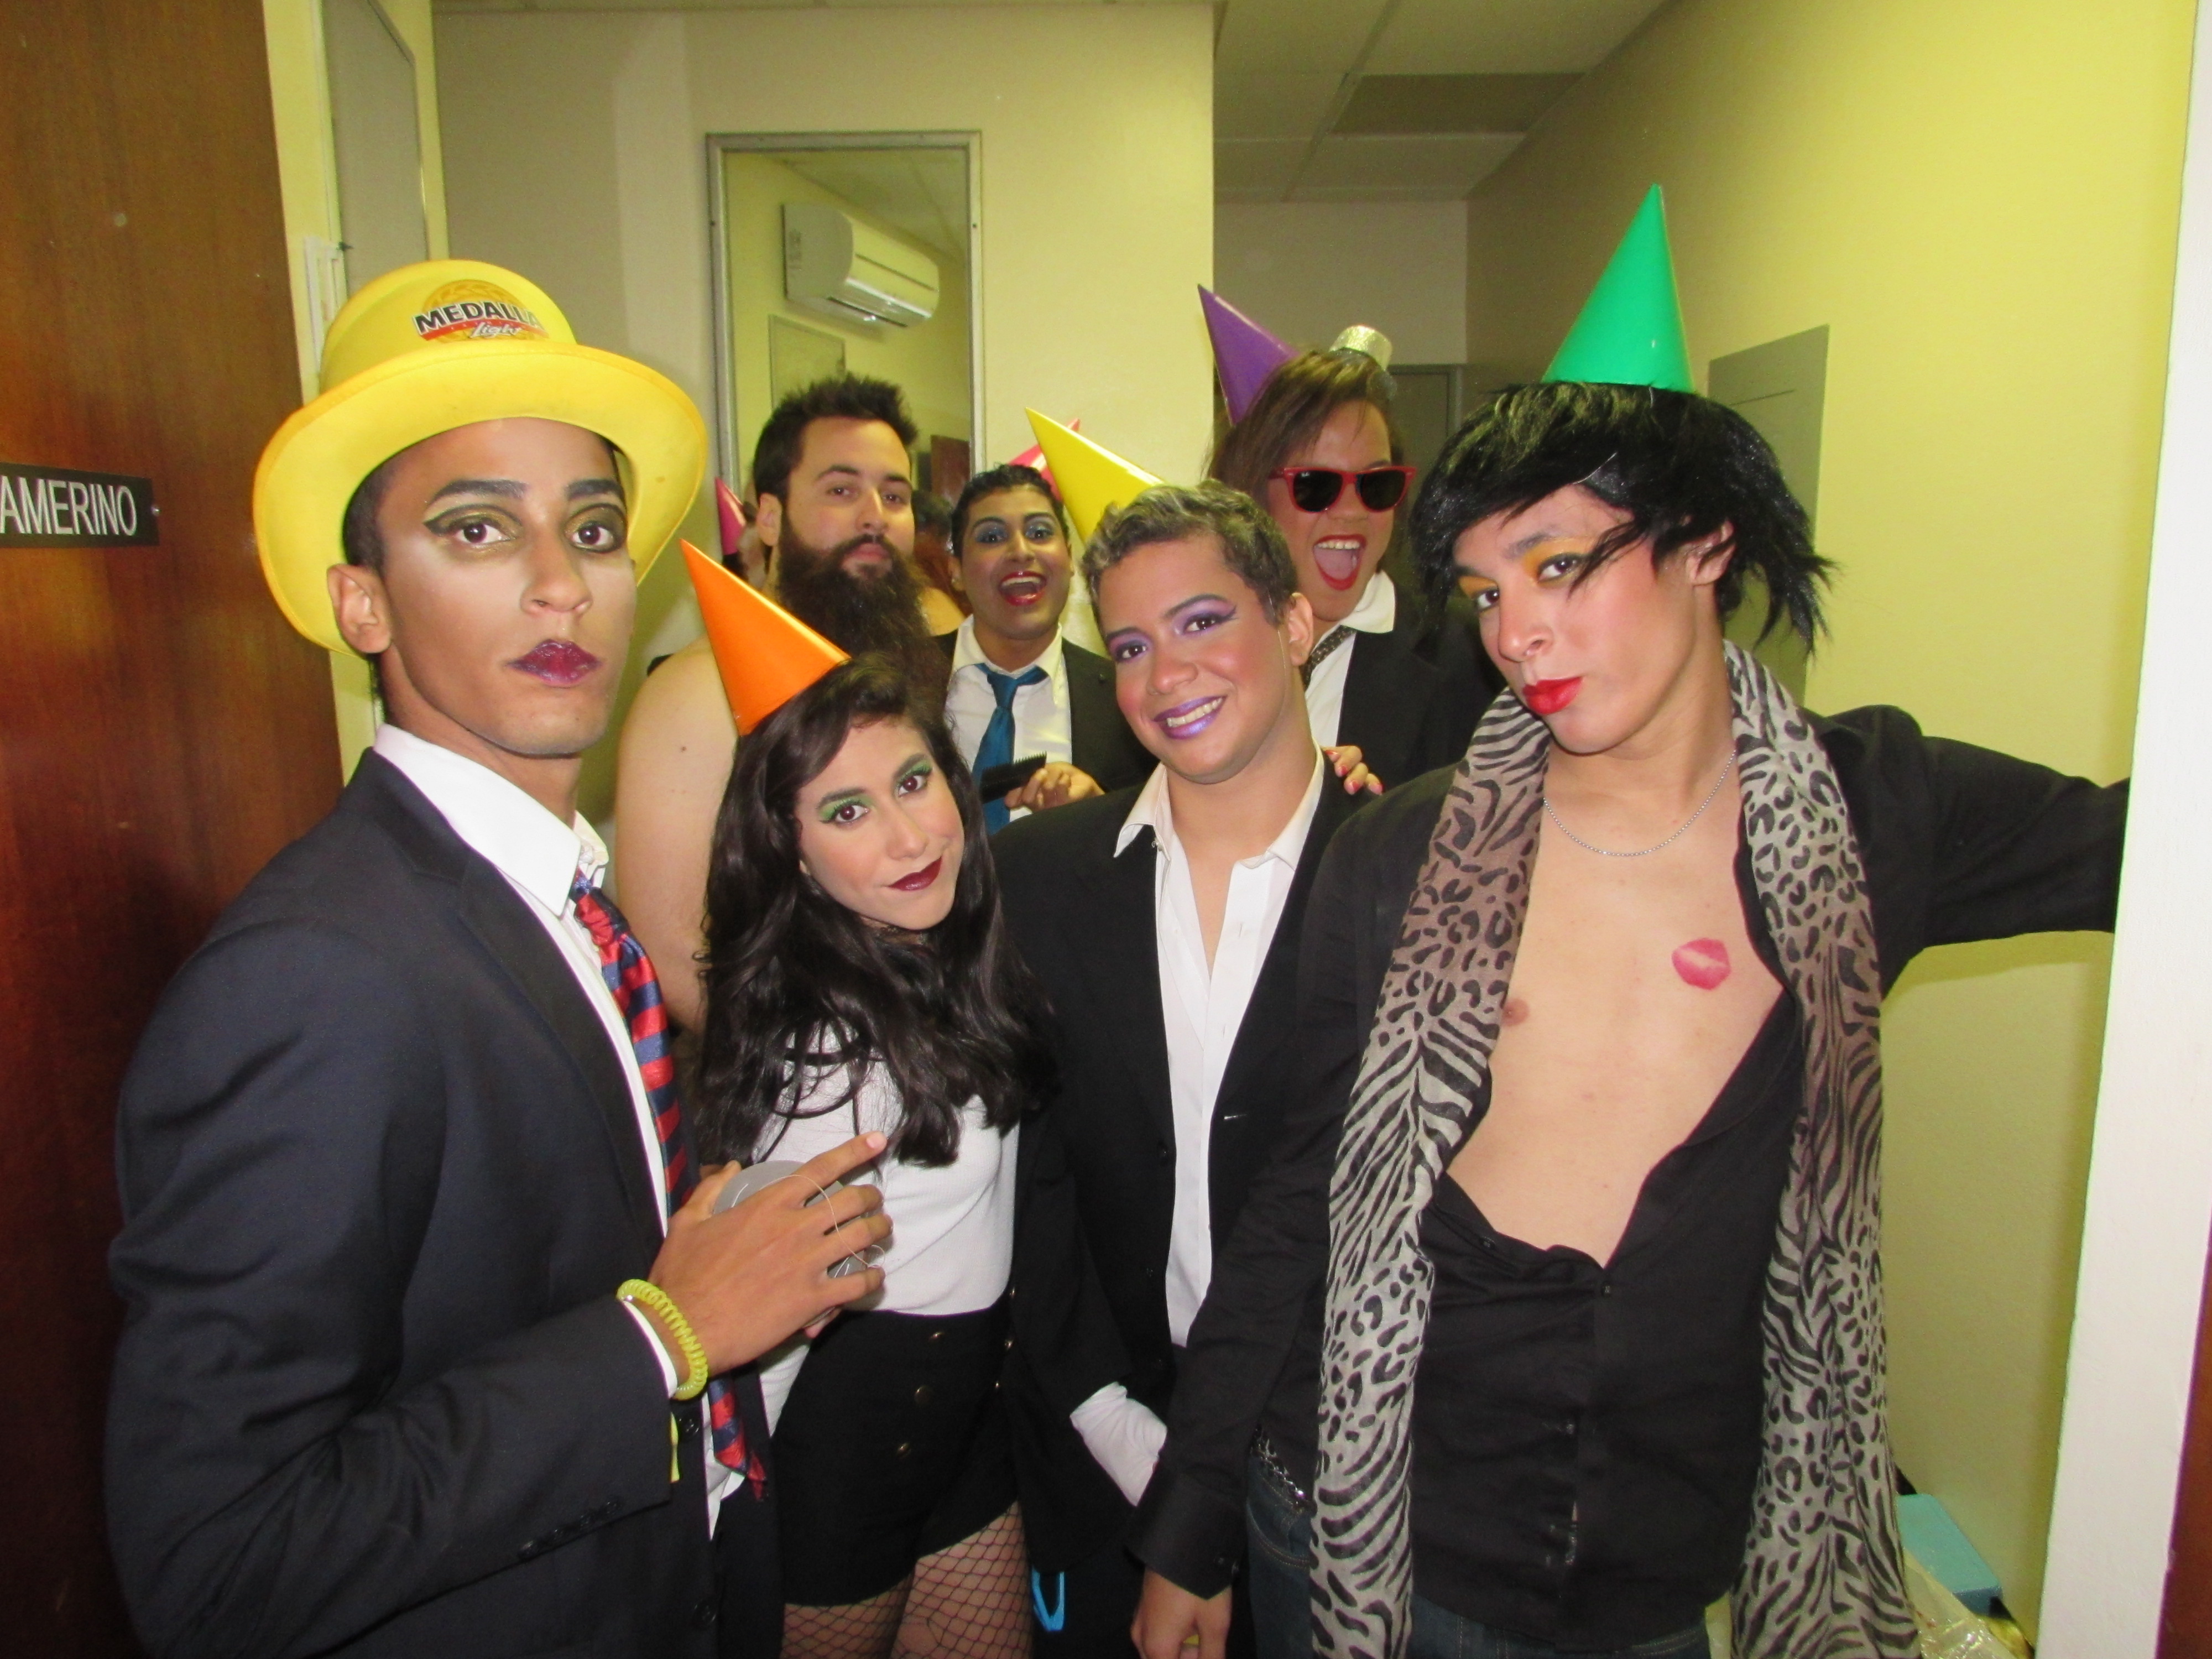 Backstage picture of the cast members before the show starts.